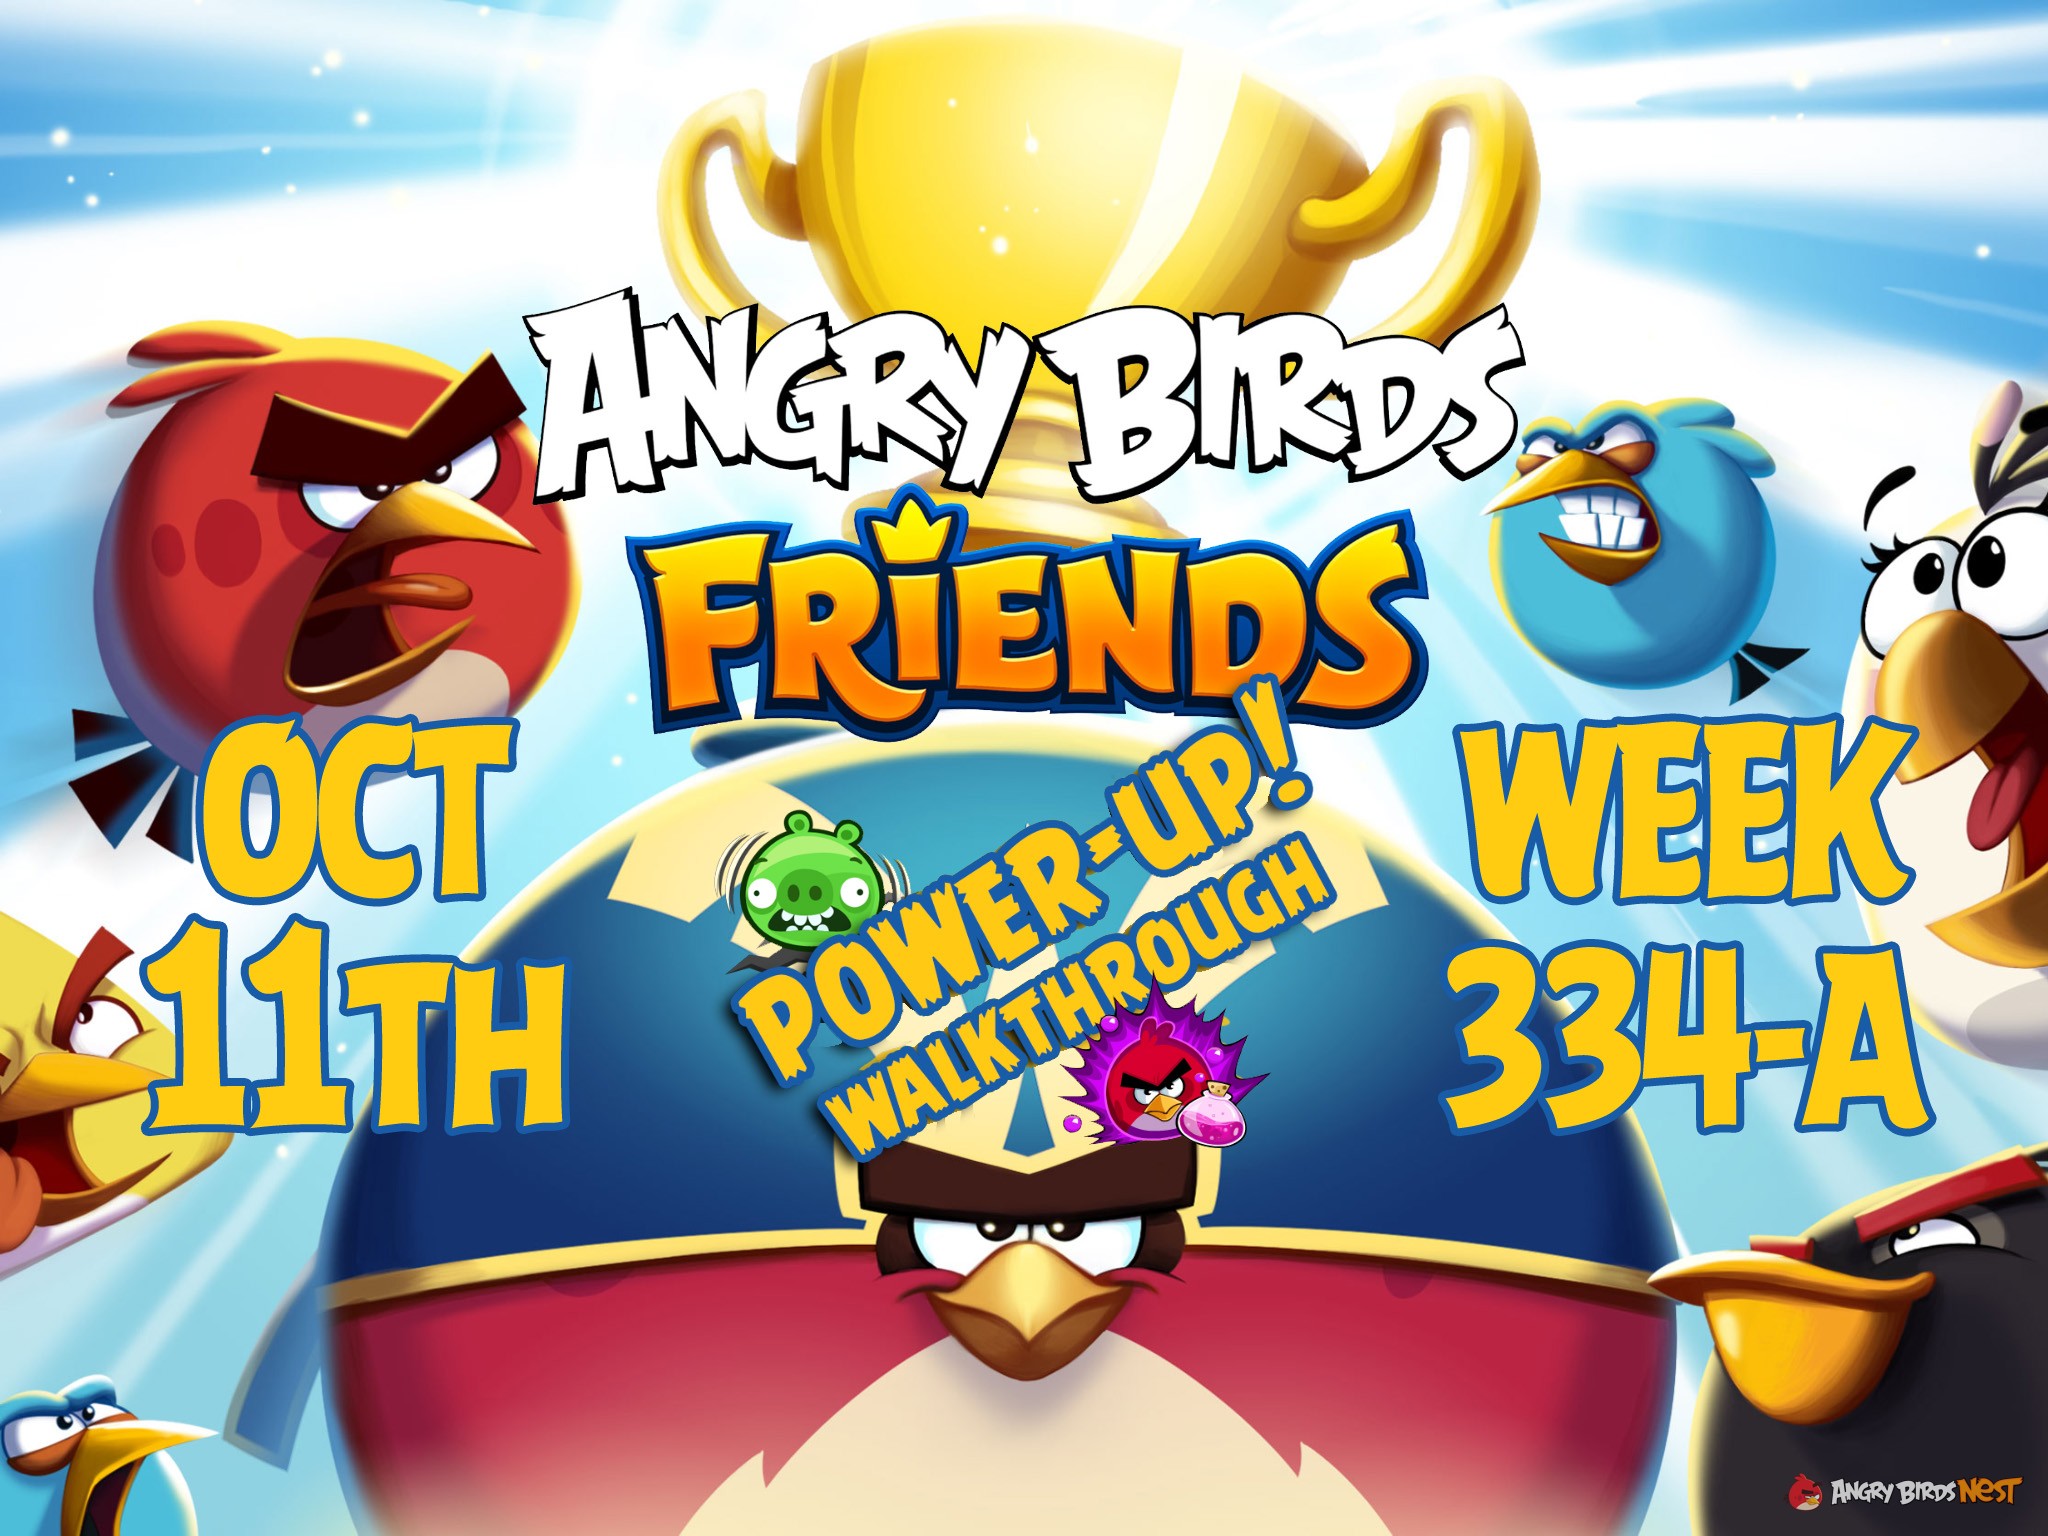 Angry-Birds-Friends-Tournament-Week-334-A-Feature-Image-PU